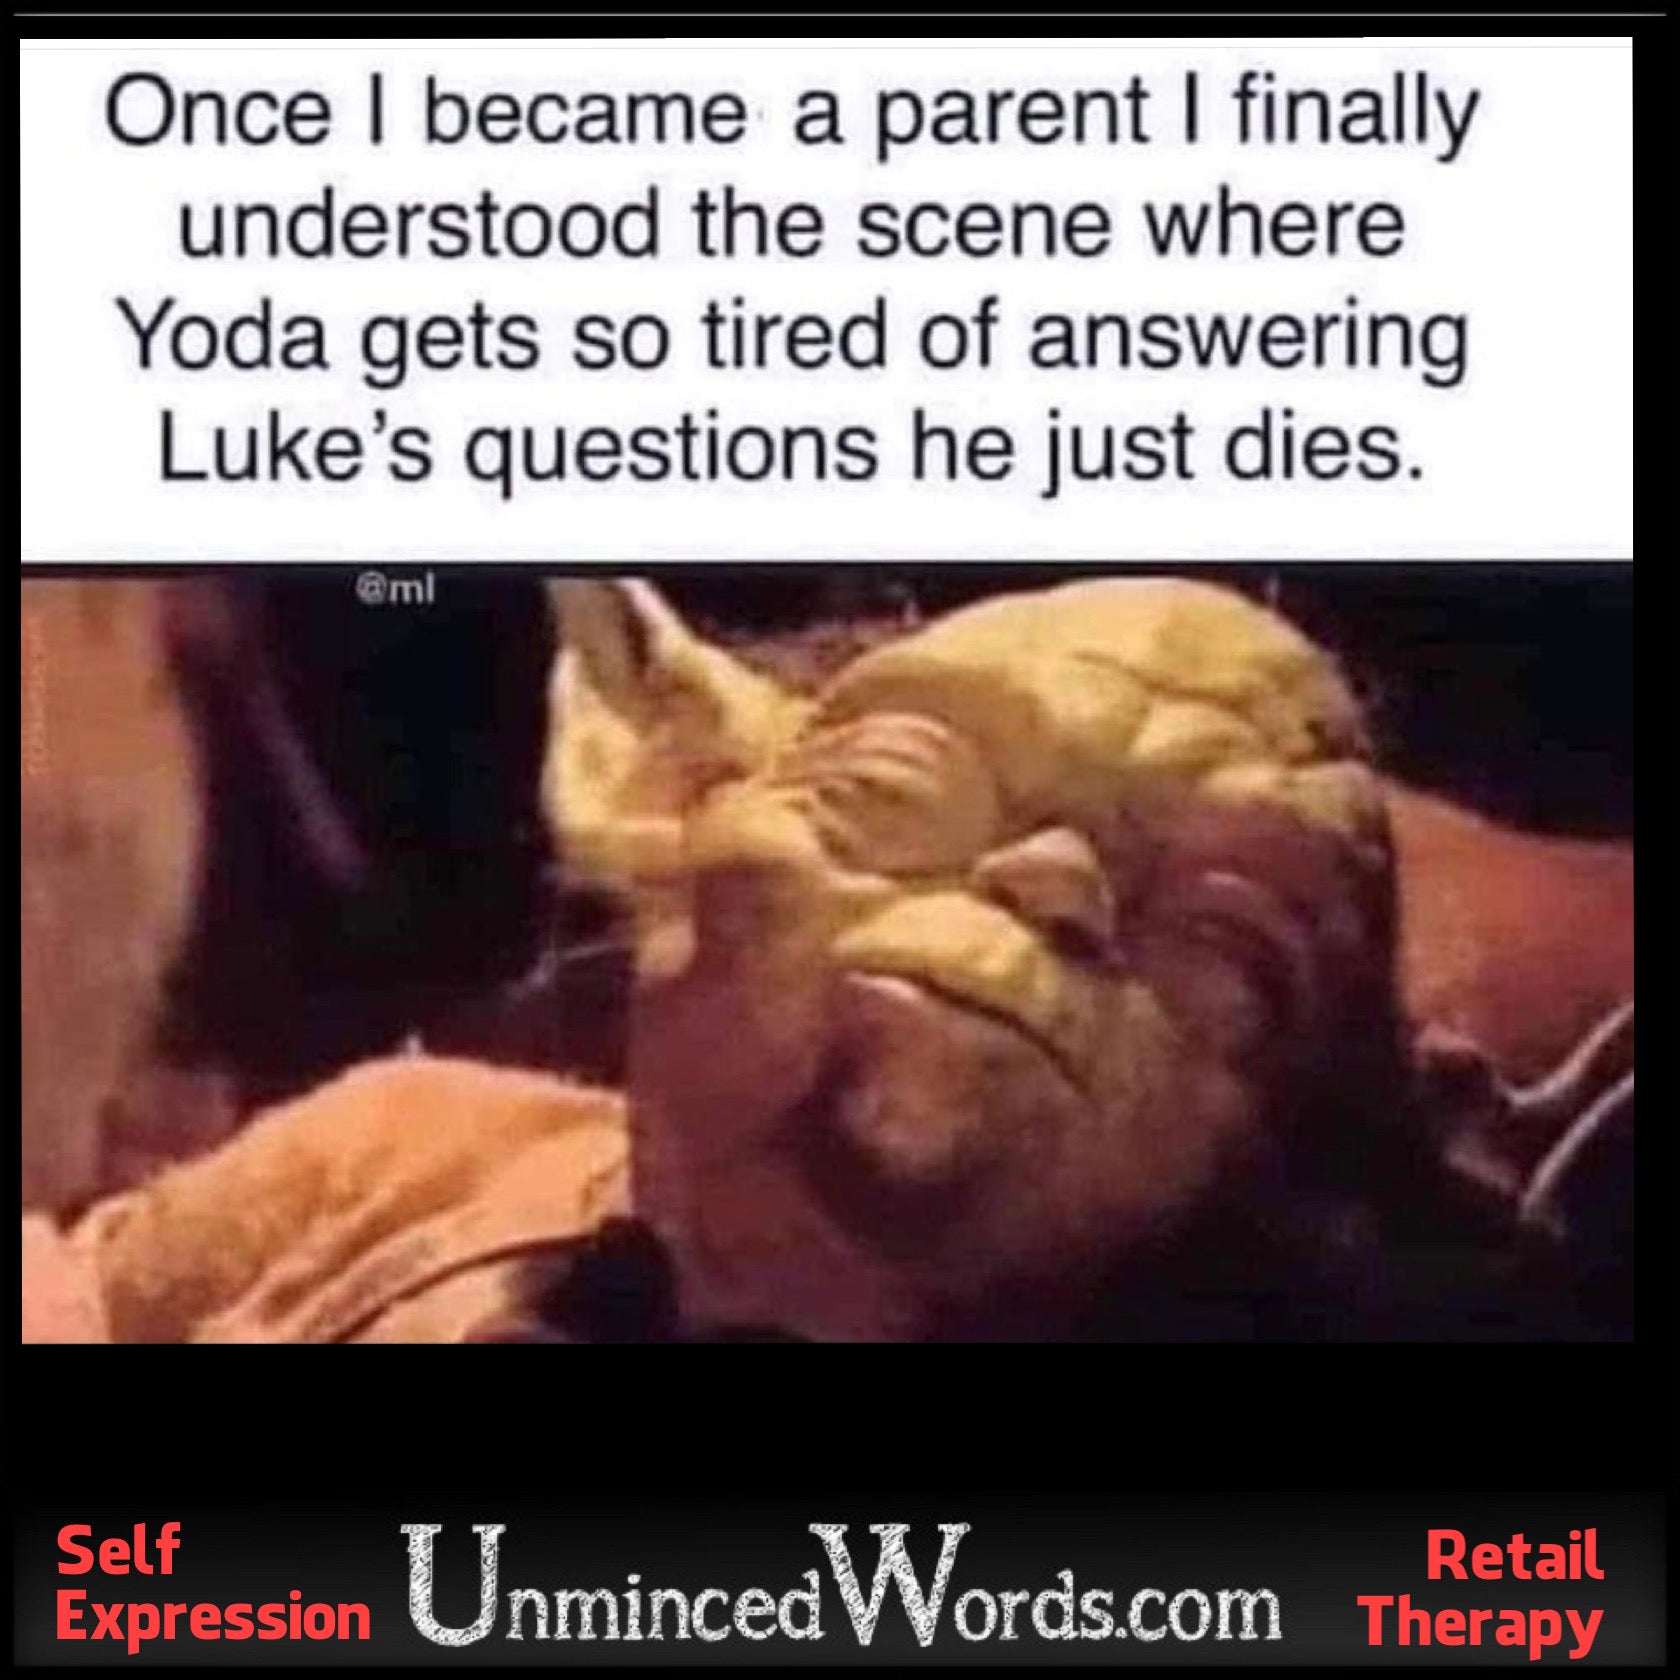 This Parenting Yoda meme is dead on